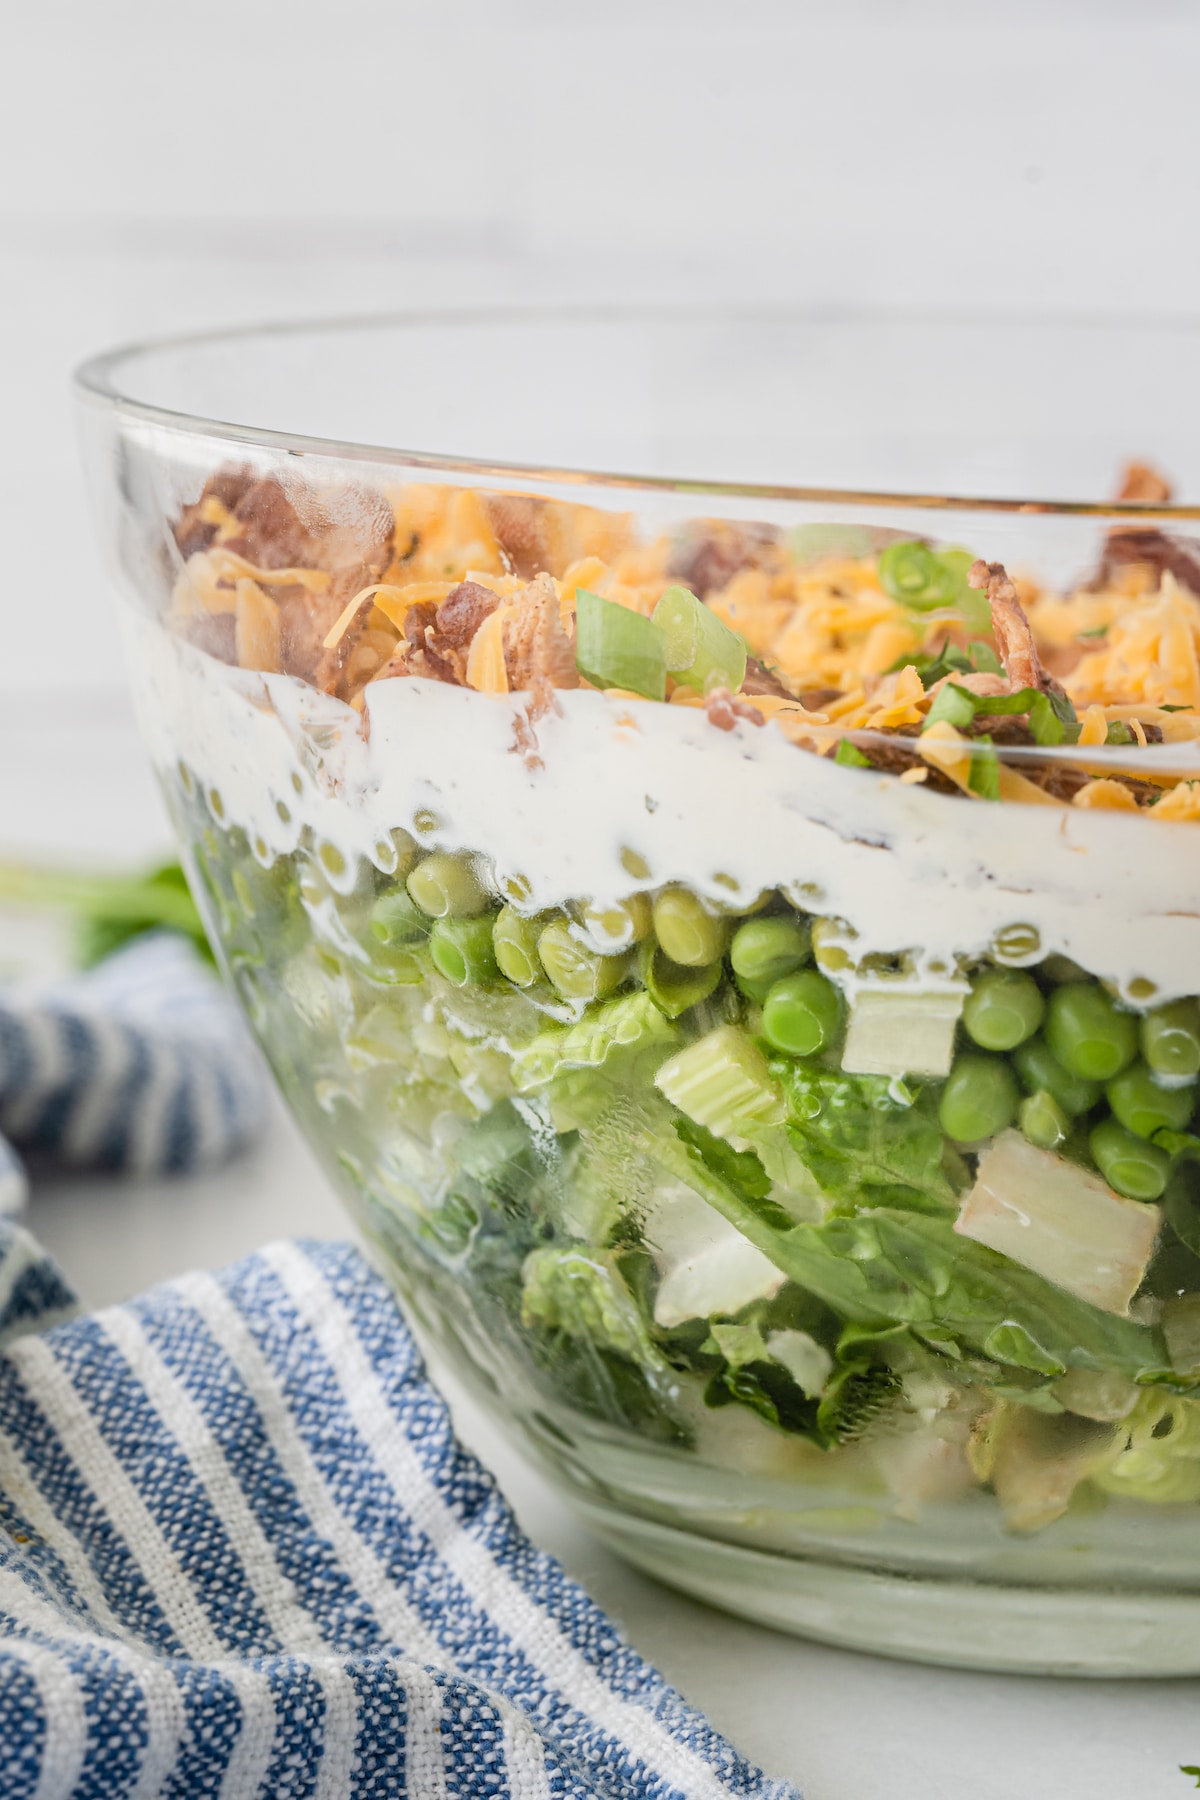 layered salad in a clear bowl showing lettuce and dressing and meat and cheese